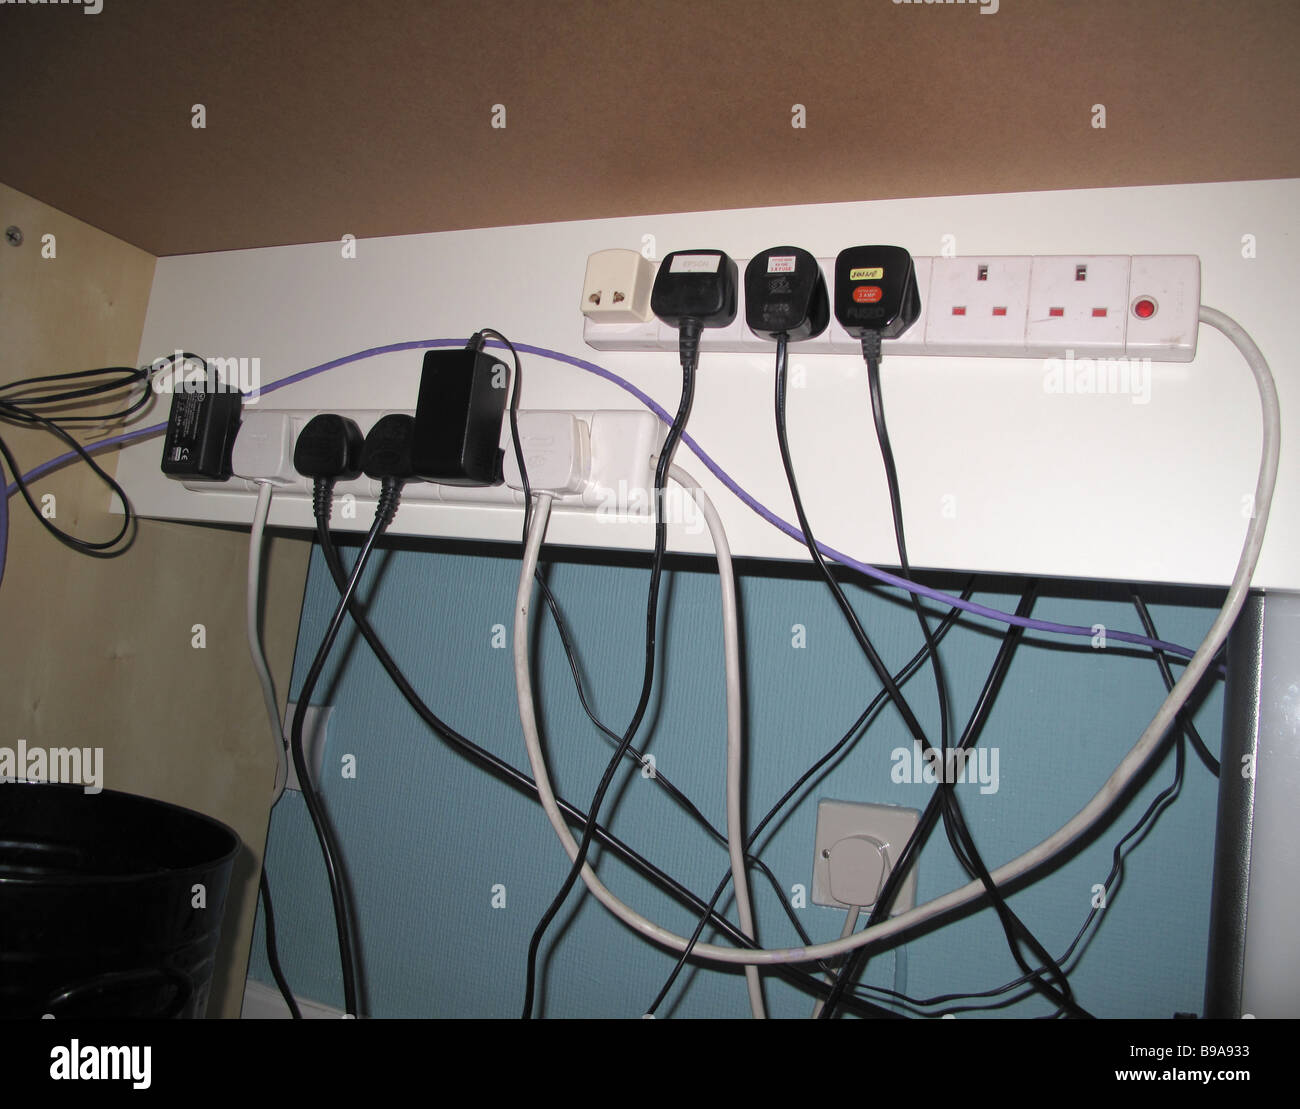 Electric Plugs And Sockets Under Desk Stock Photo 22968935 Alamy